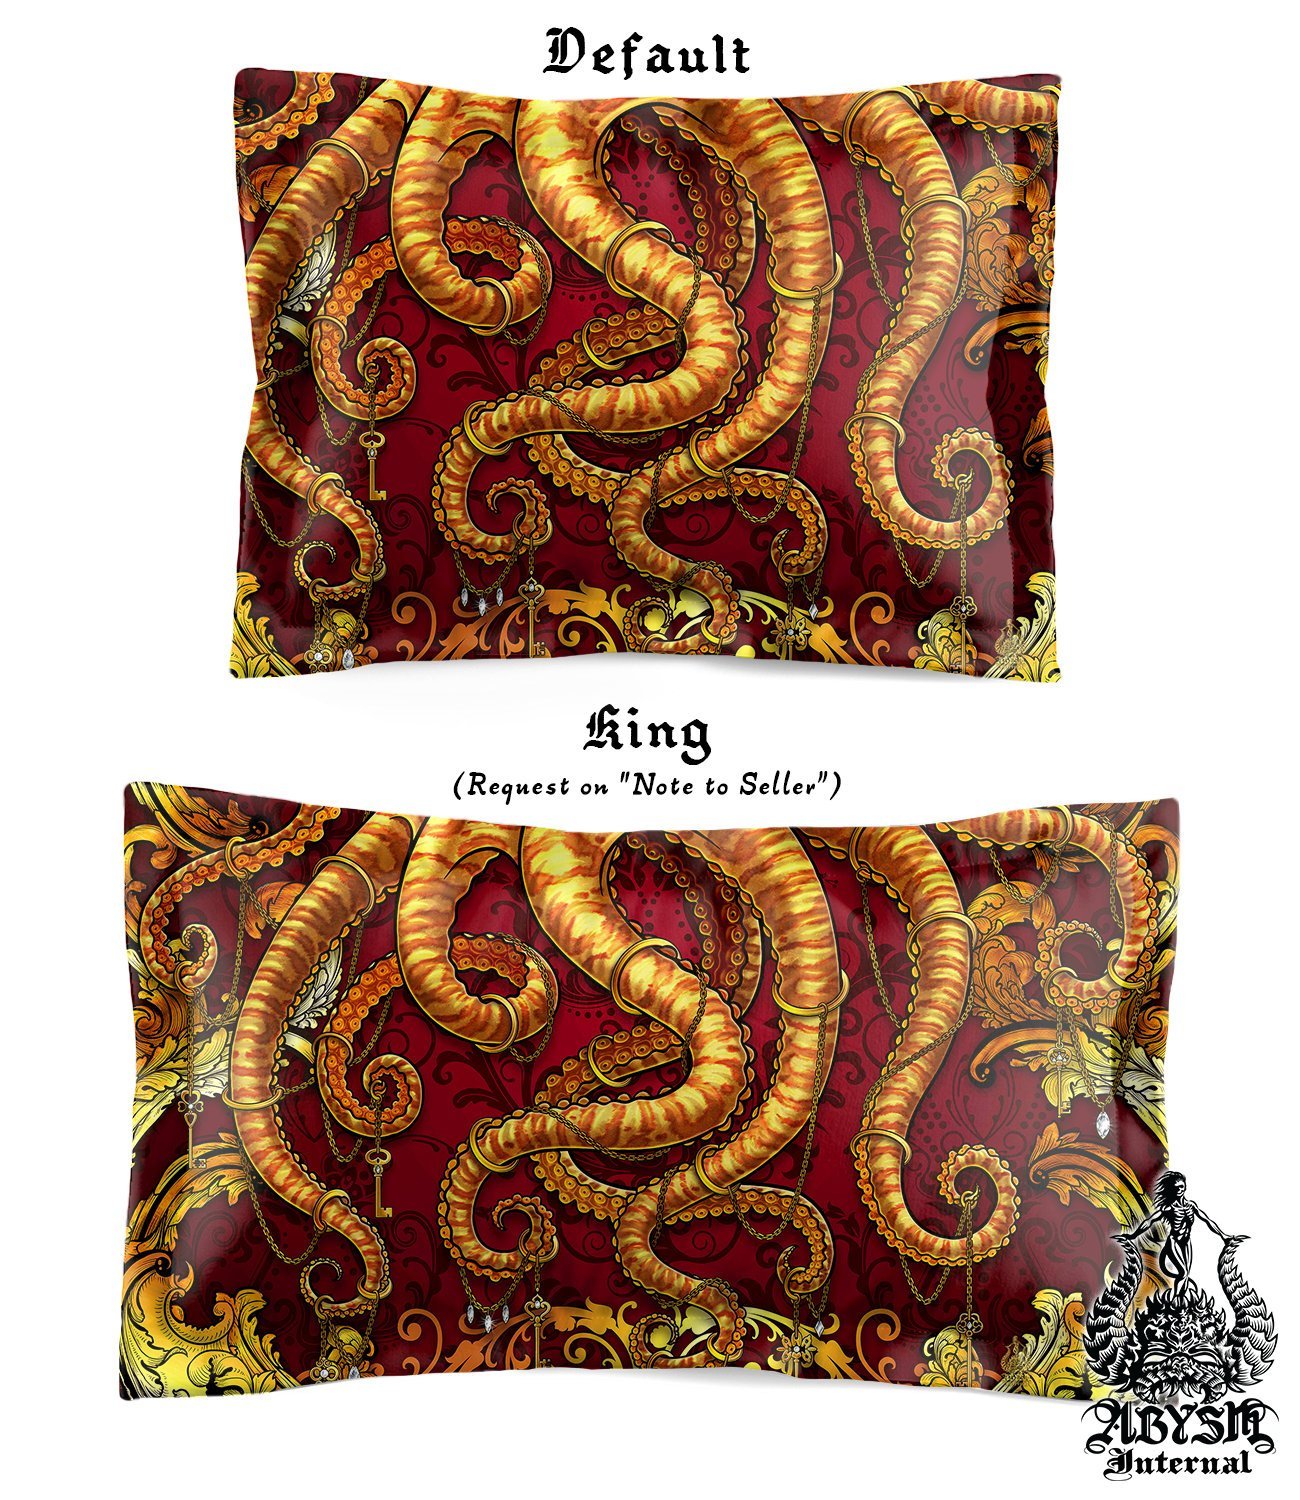 Octopus Bedding Set, Comforter and Duvet, Alternative Bed Cover, Coastal Bedroom Decor, King, Queen and Twin Size - Gold and Red - Abysm Internal